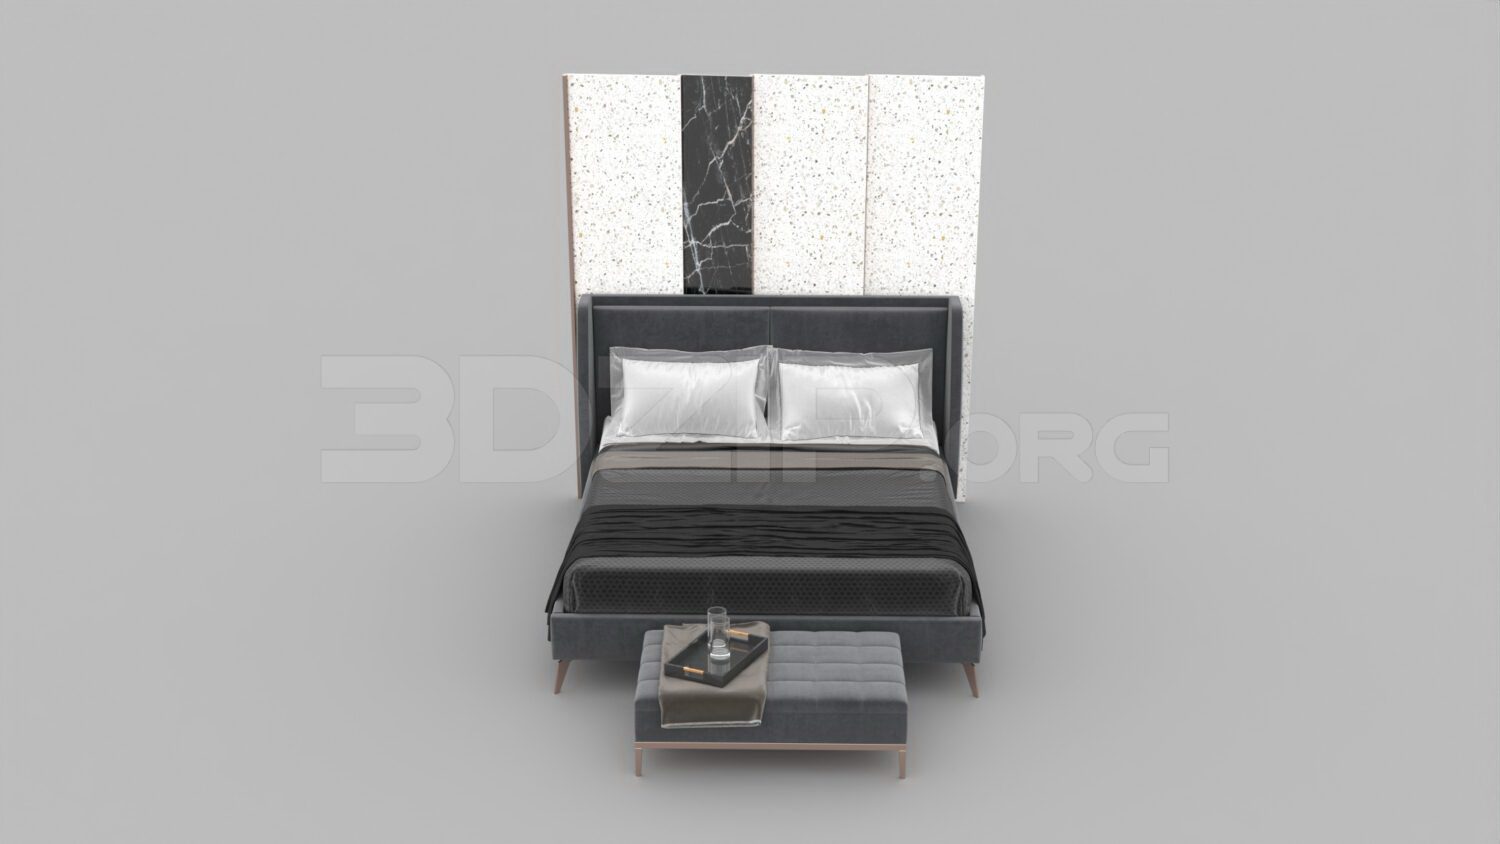 1187. Download Free Bed Model By Nam Tran